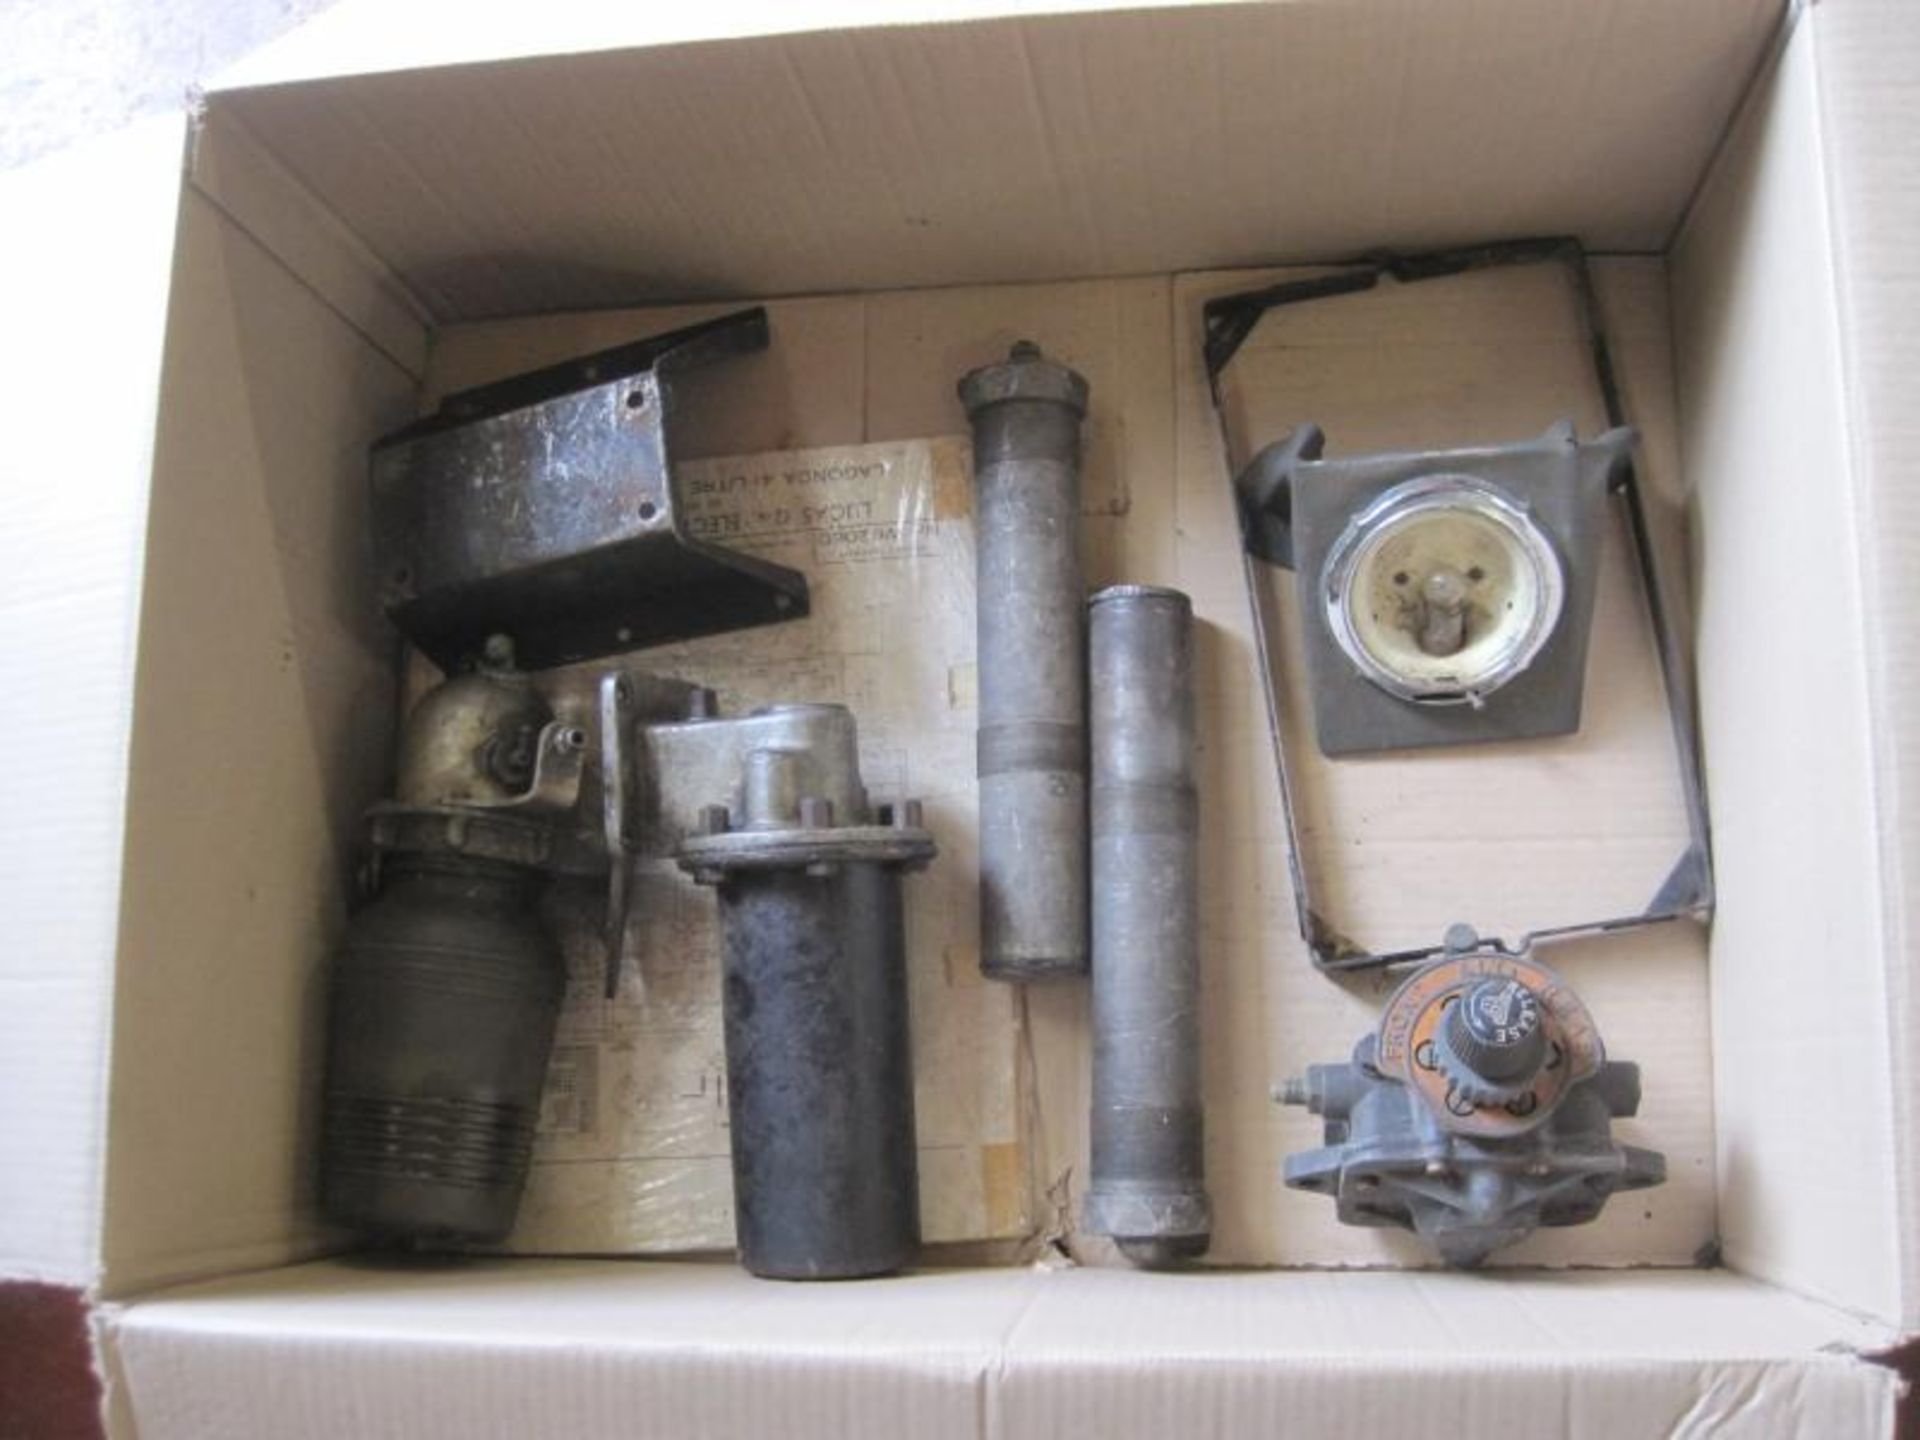 Vintage car spares to include running board, fuel can clamp, glass screen wash bottle etc.